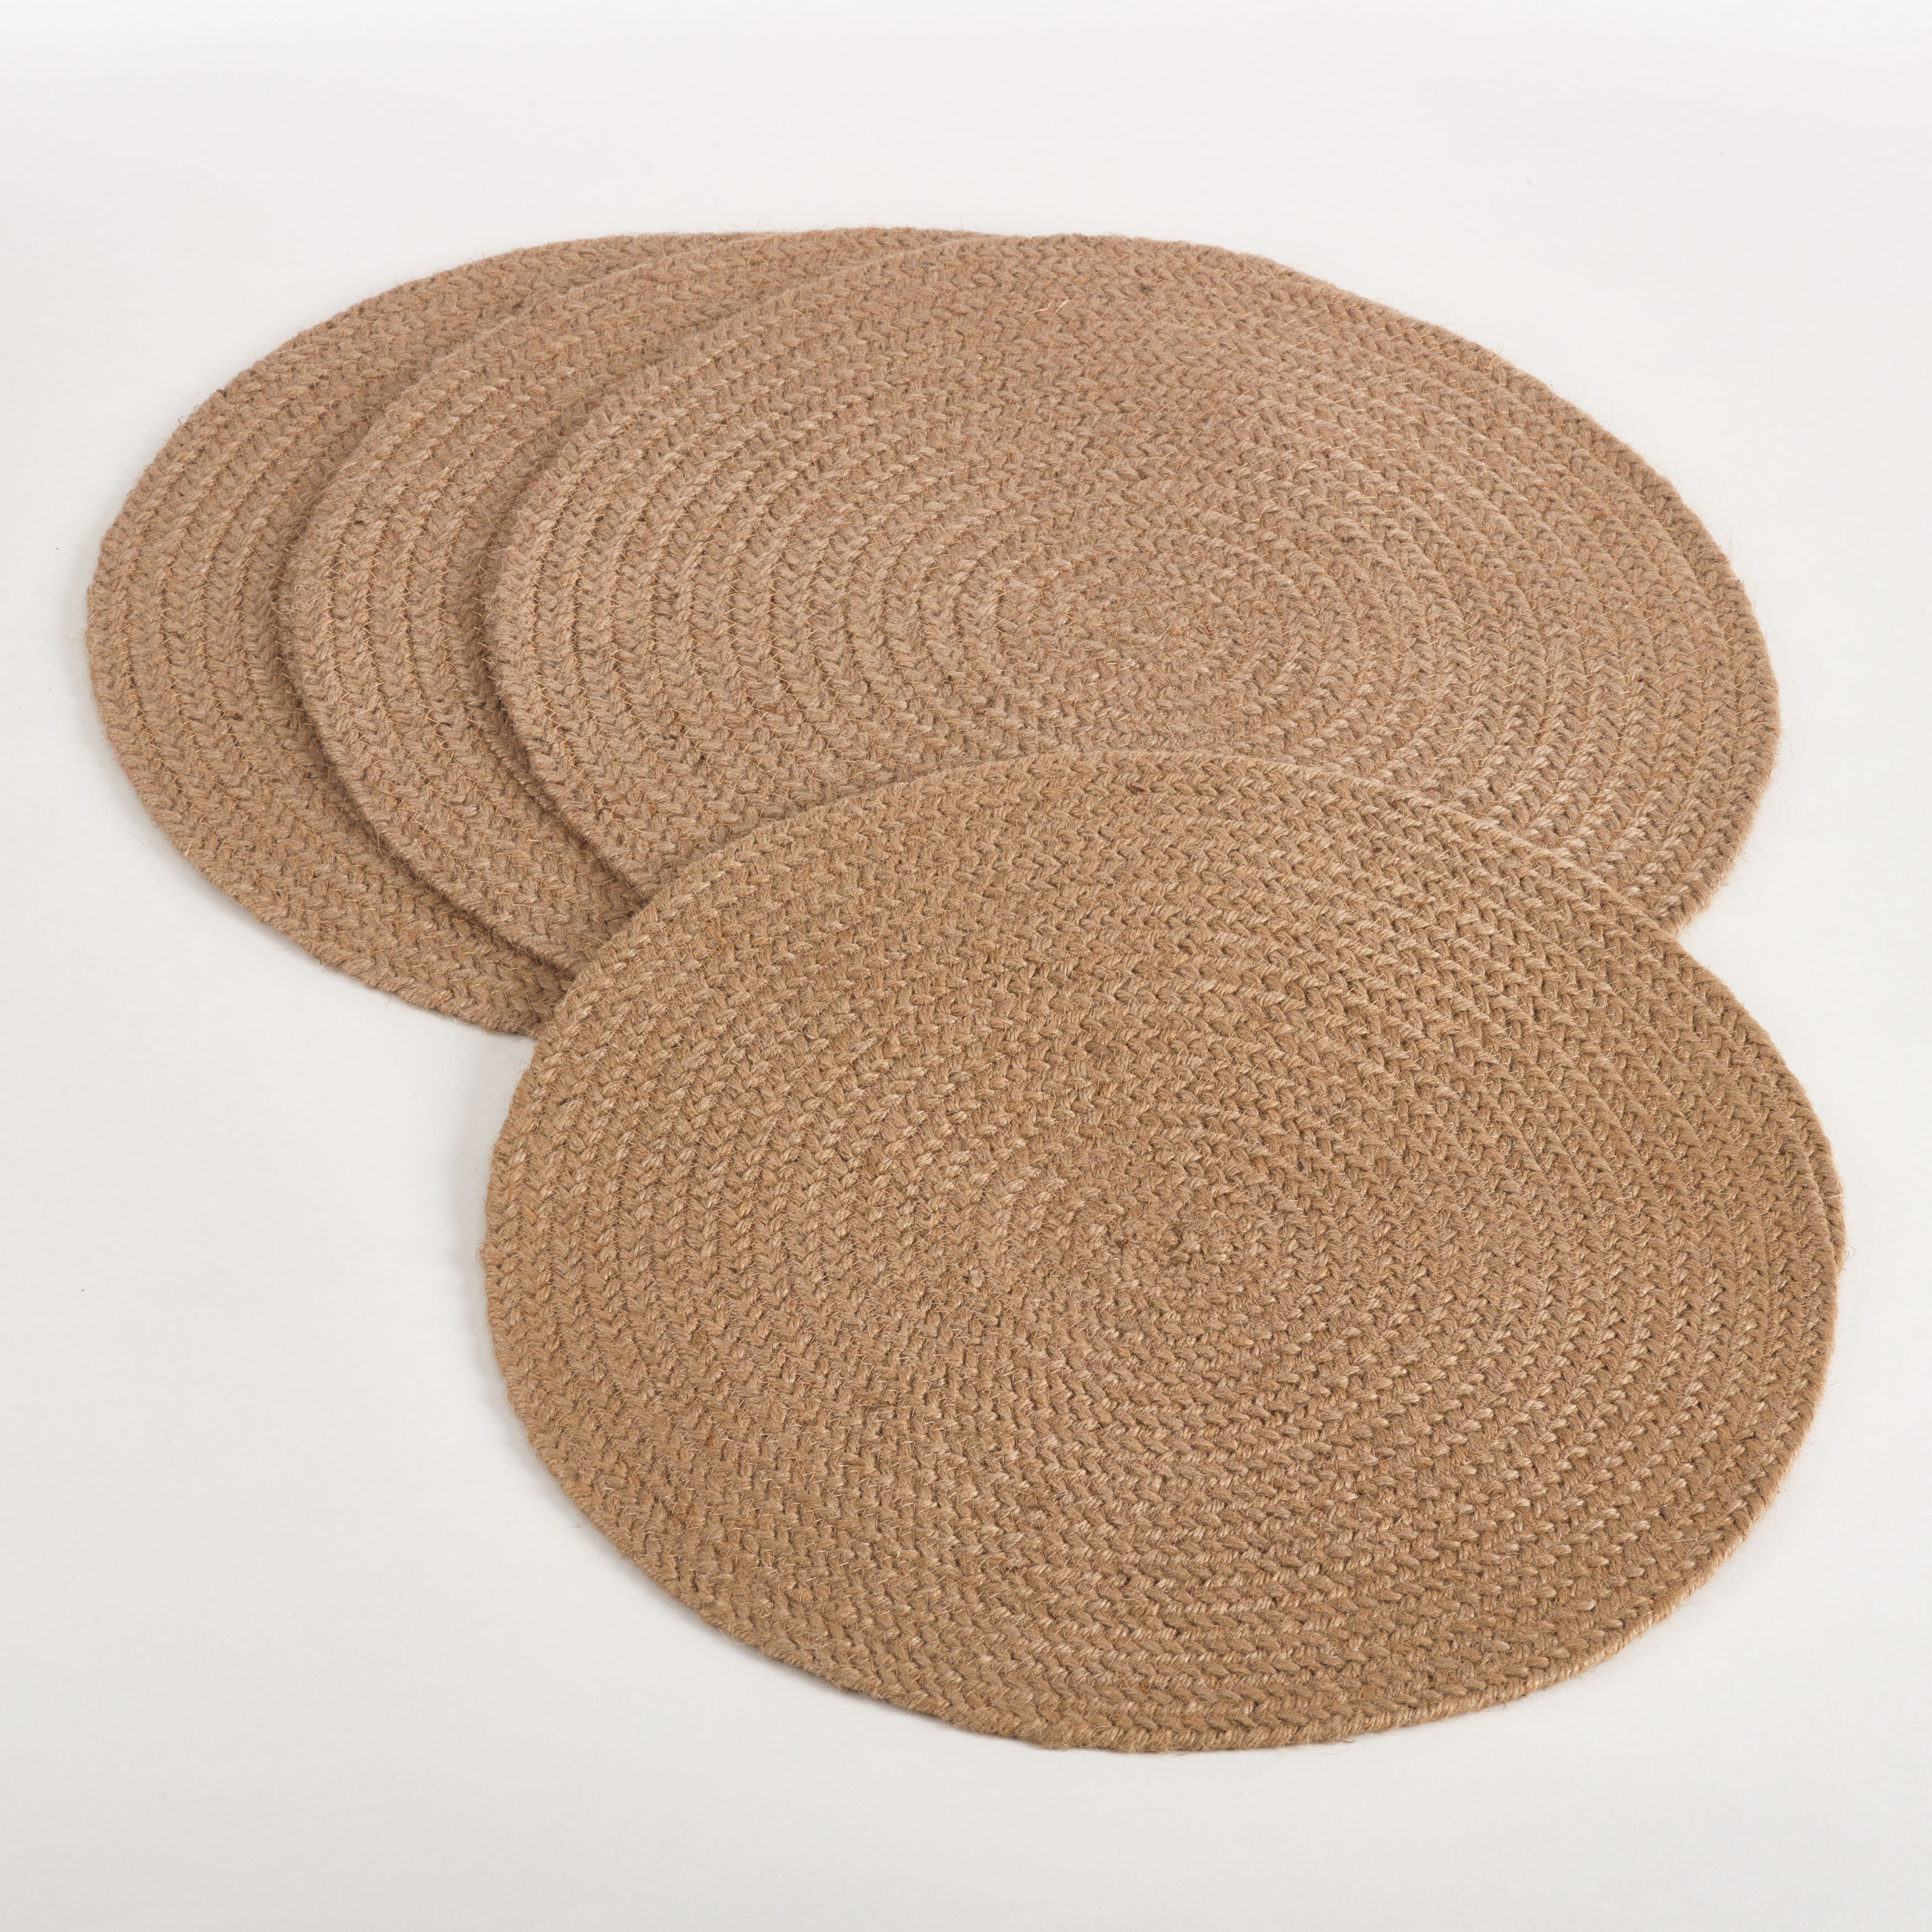 Jute / Rattan Round Placemats, From $30 Until 11/20, Wayfair